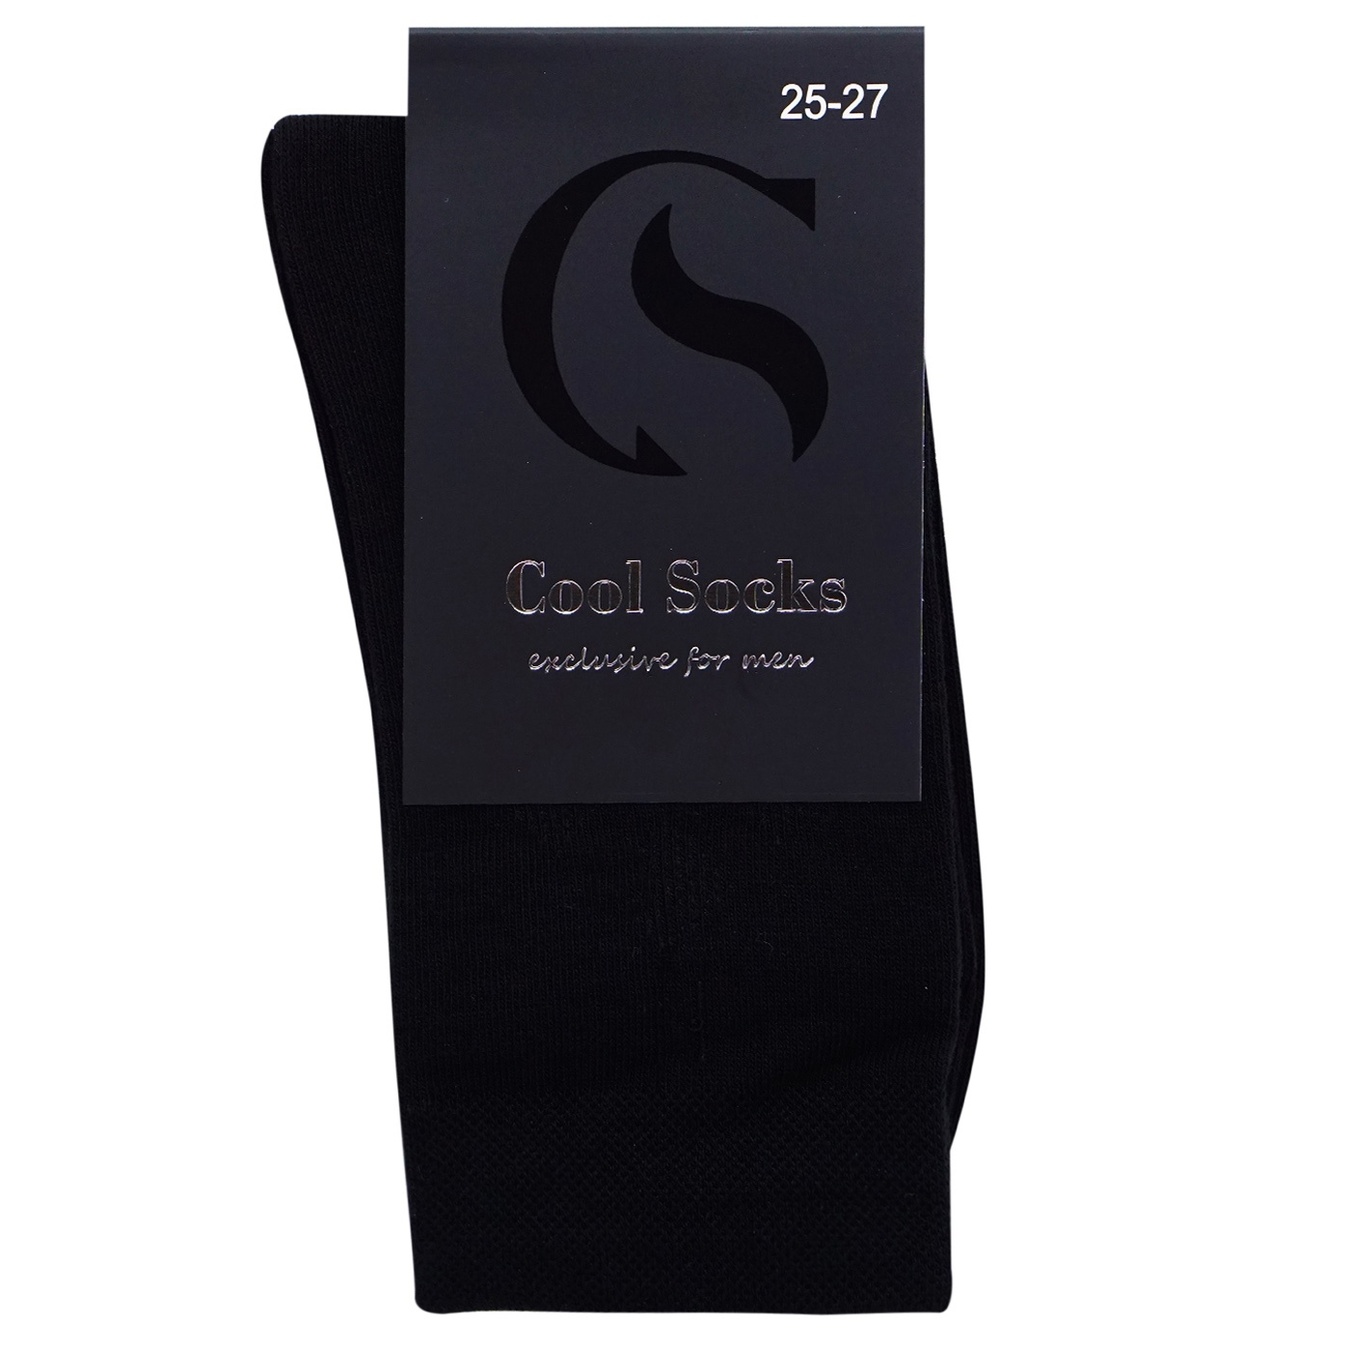 Cool Socks men's socks with a black pattern 25-27 years old.